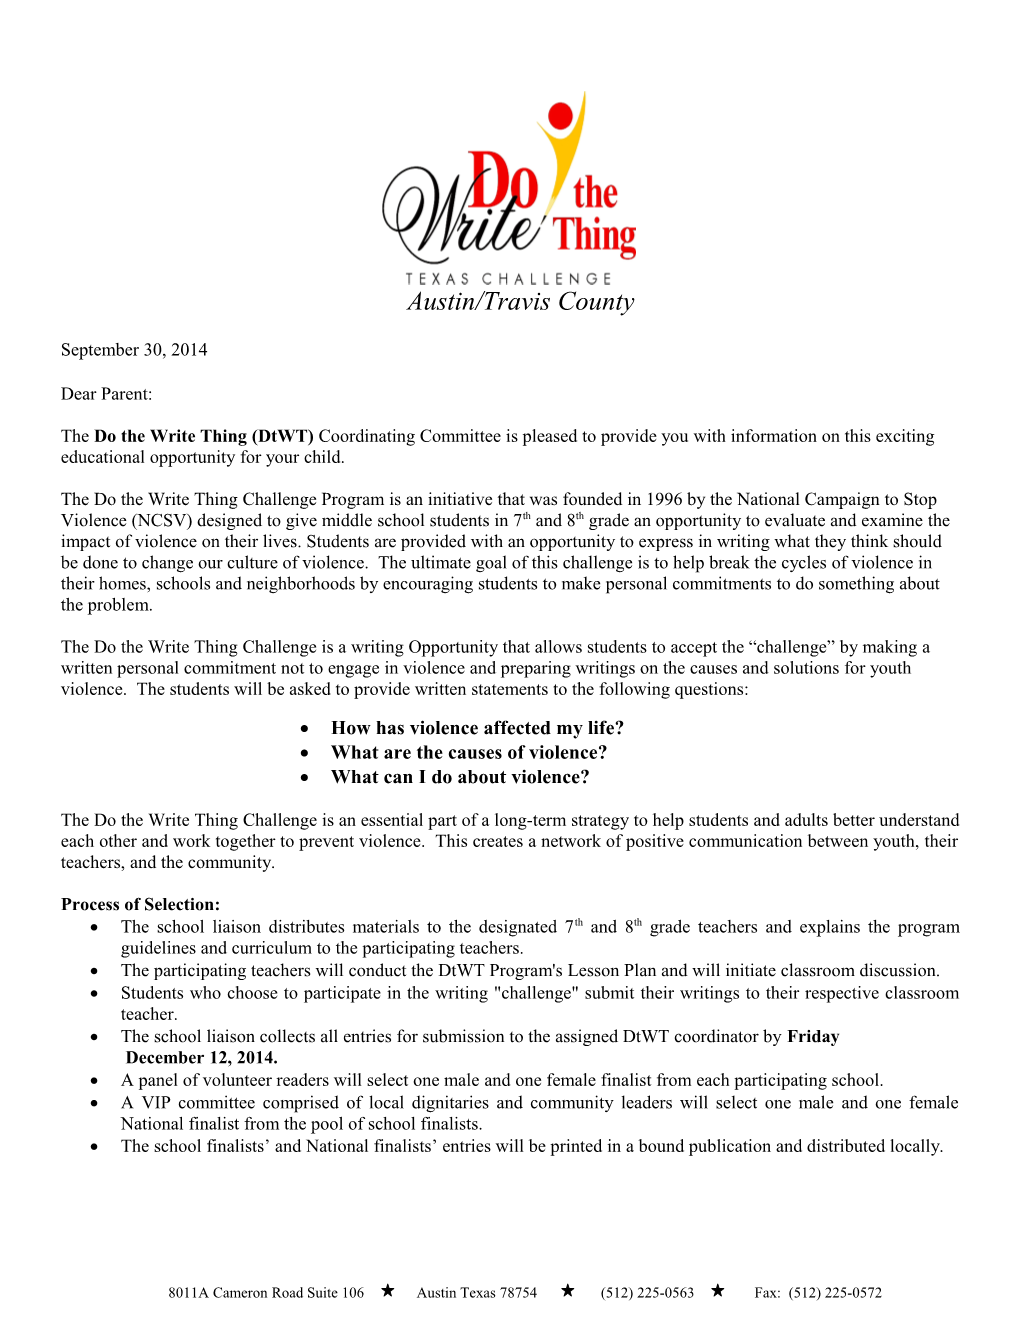 The Do the Write Thing(Dtwt) Coordinating Committee Is Pleased to Provide You with Information